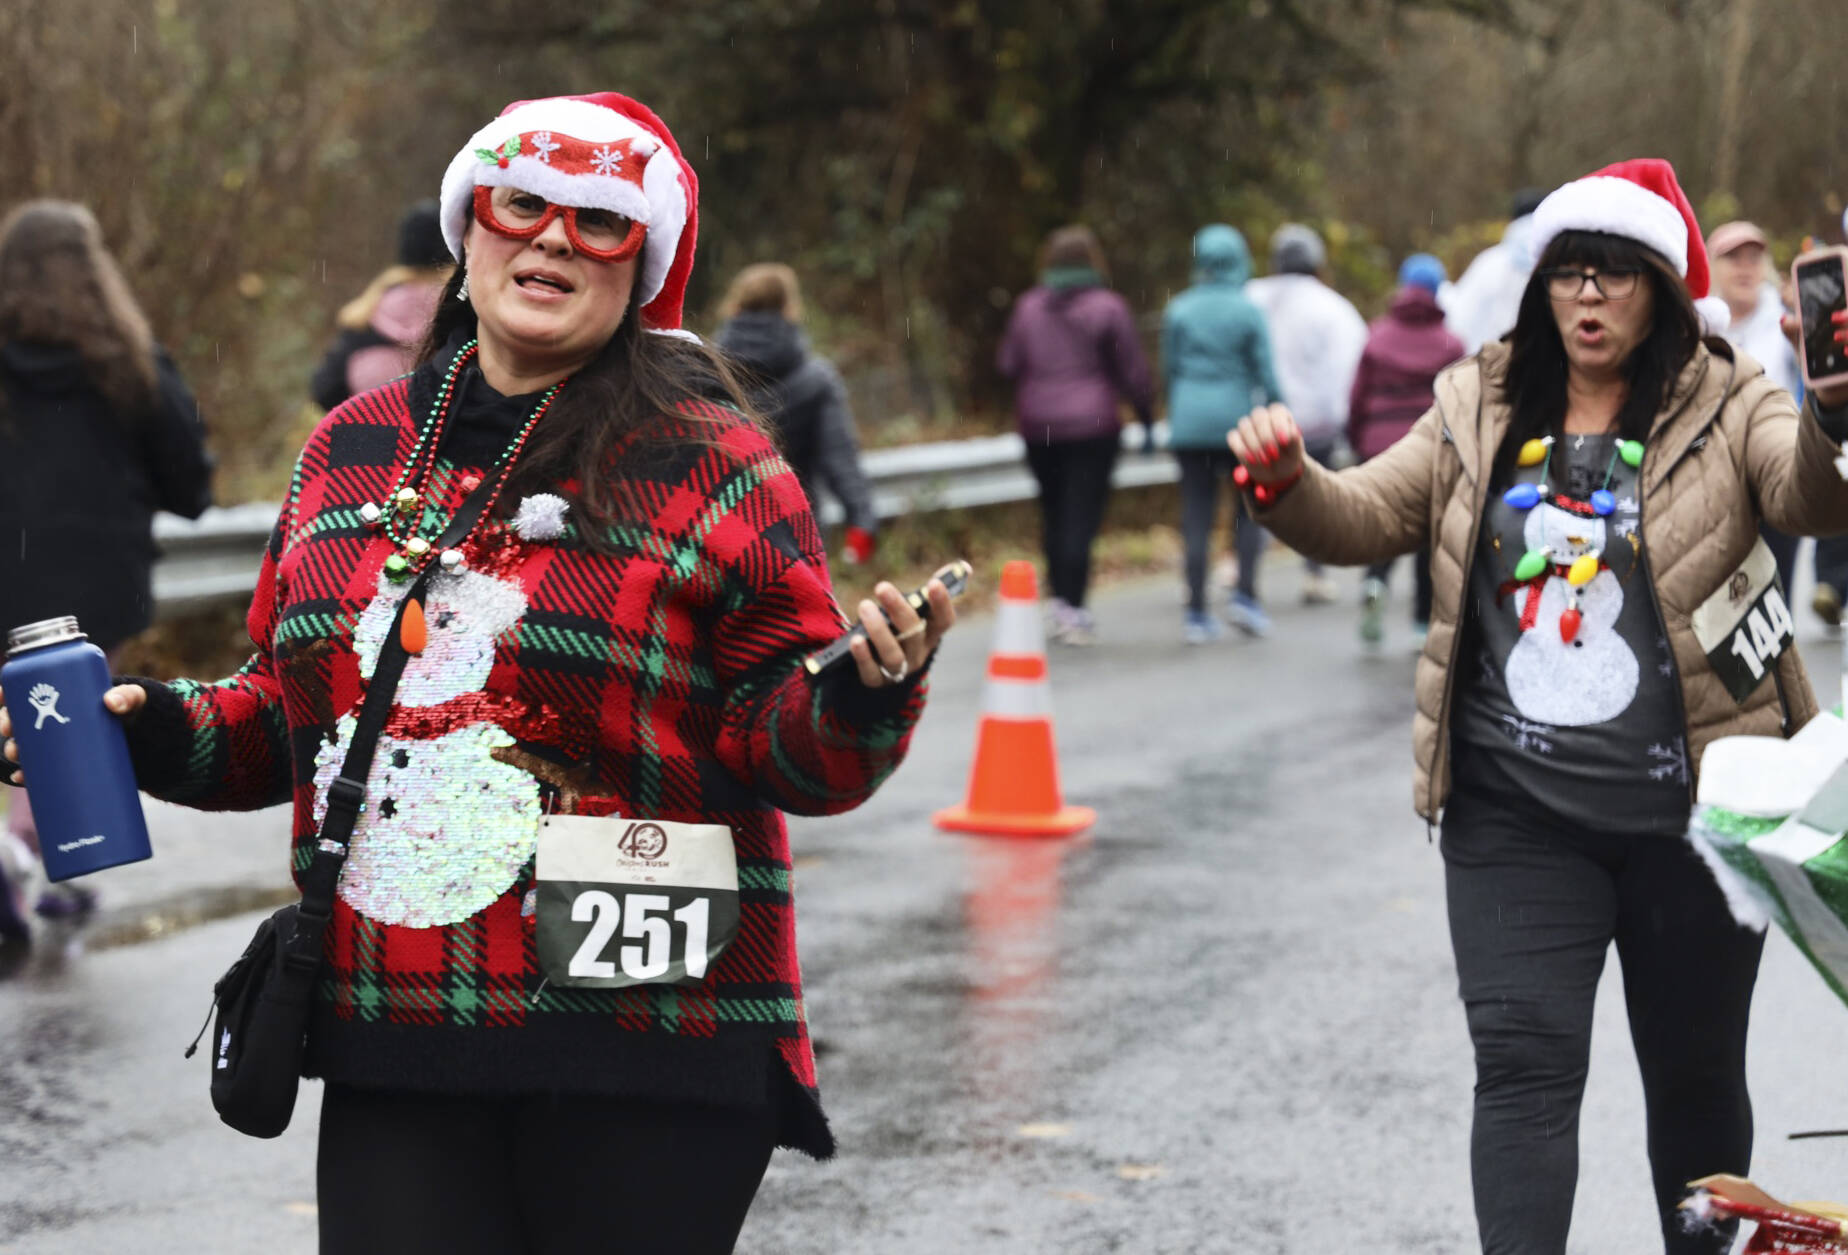 Denise Macias, left, of Federal Way, and Shelly Hall, of Kent, display their holiday outfits in the Christmas Rush 10K/5K run/walk Dec. 10 in Kent. COURTESY PHOTO, City of Kent